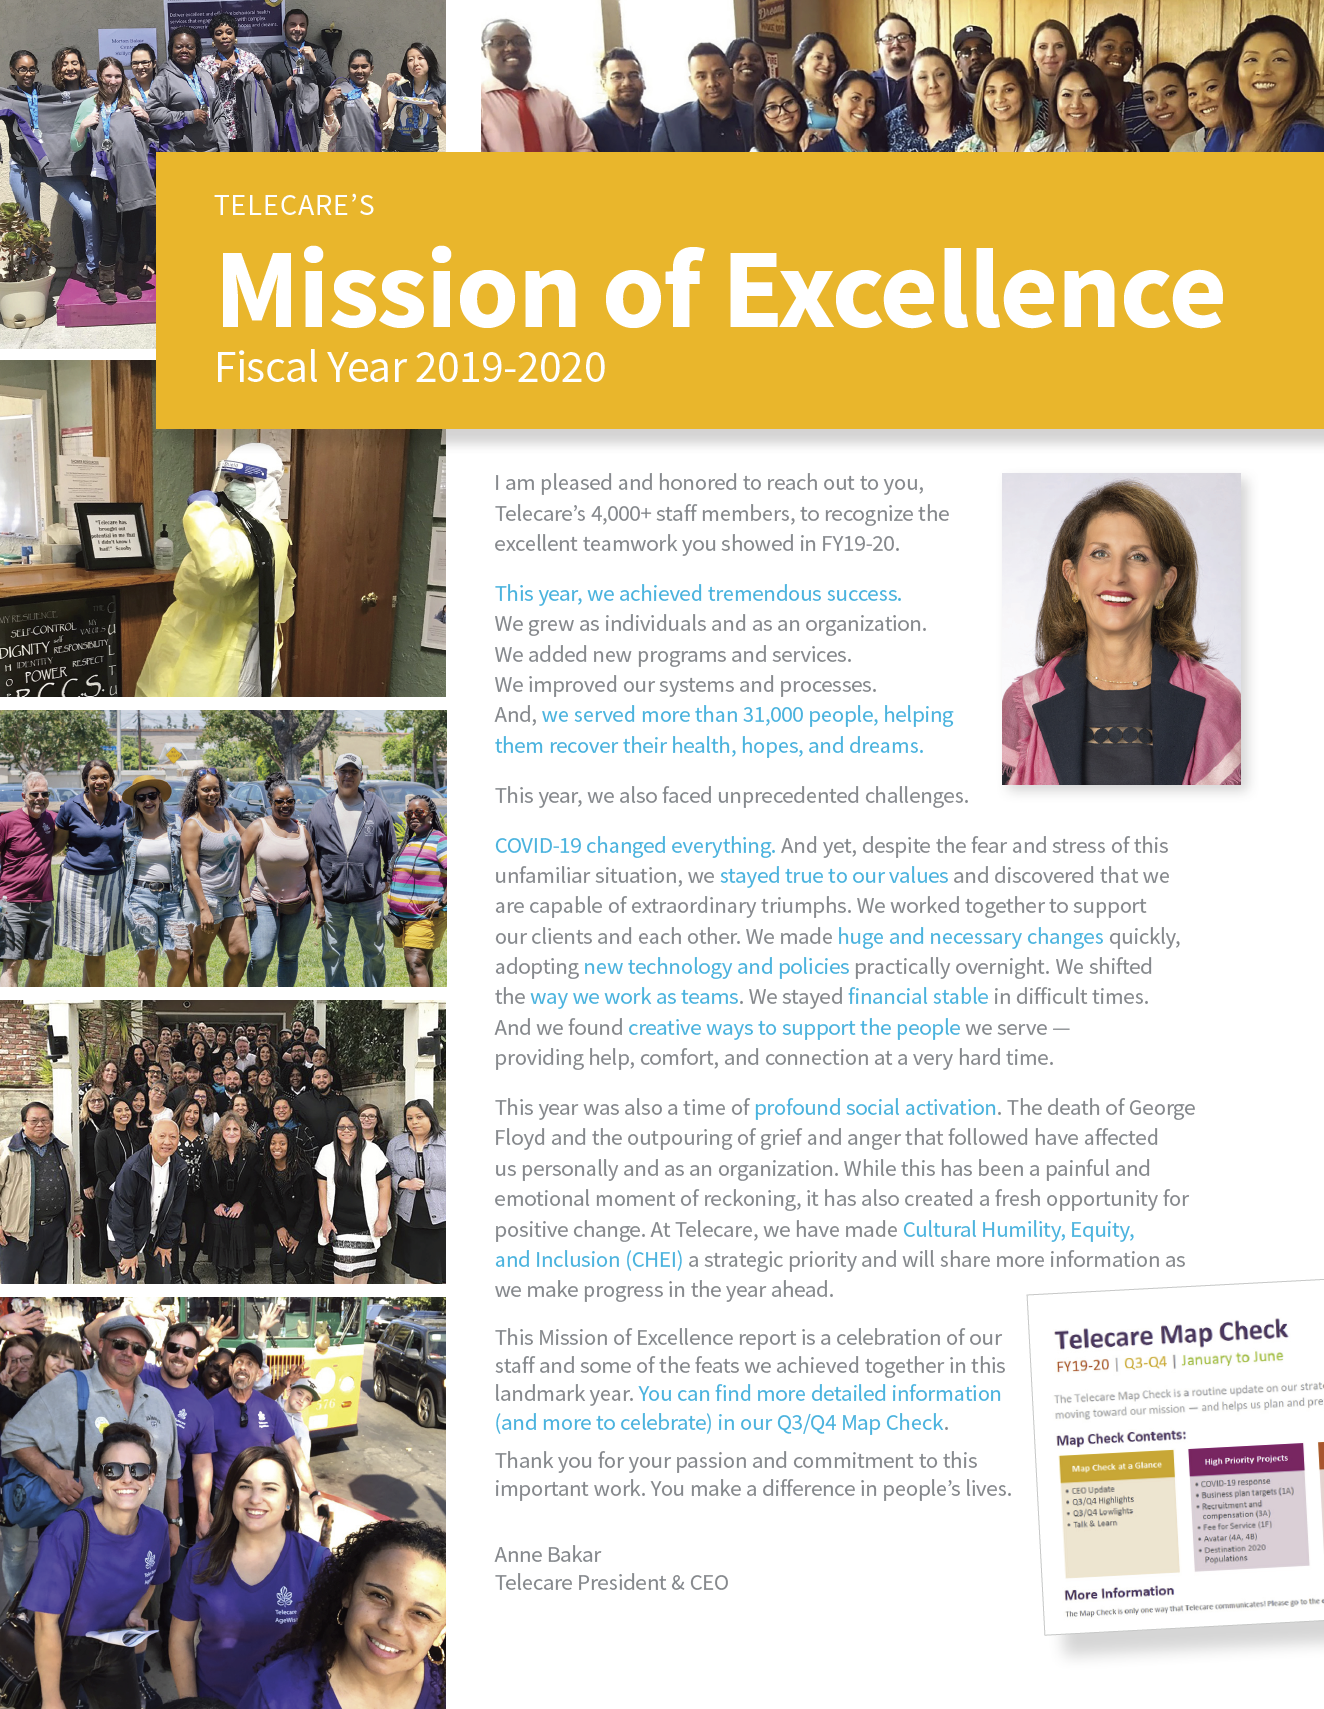 Telecare Mission of Excellence_FY19-20_vFINAL for Web.PNG